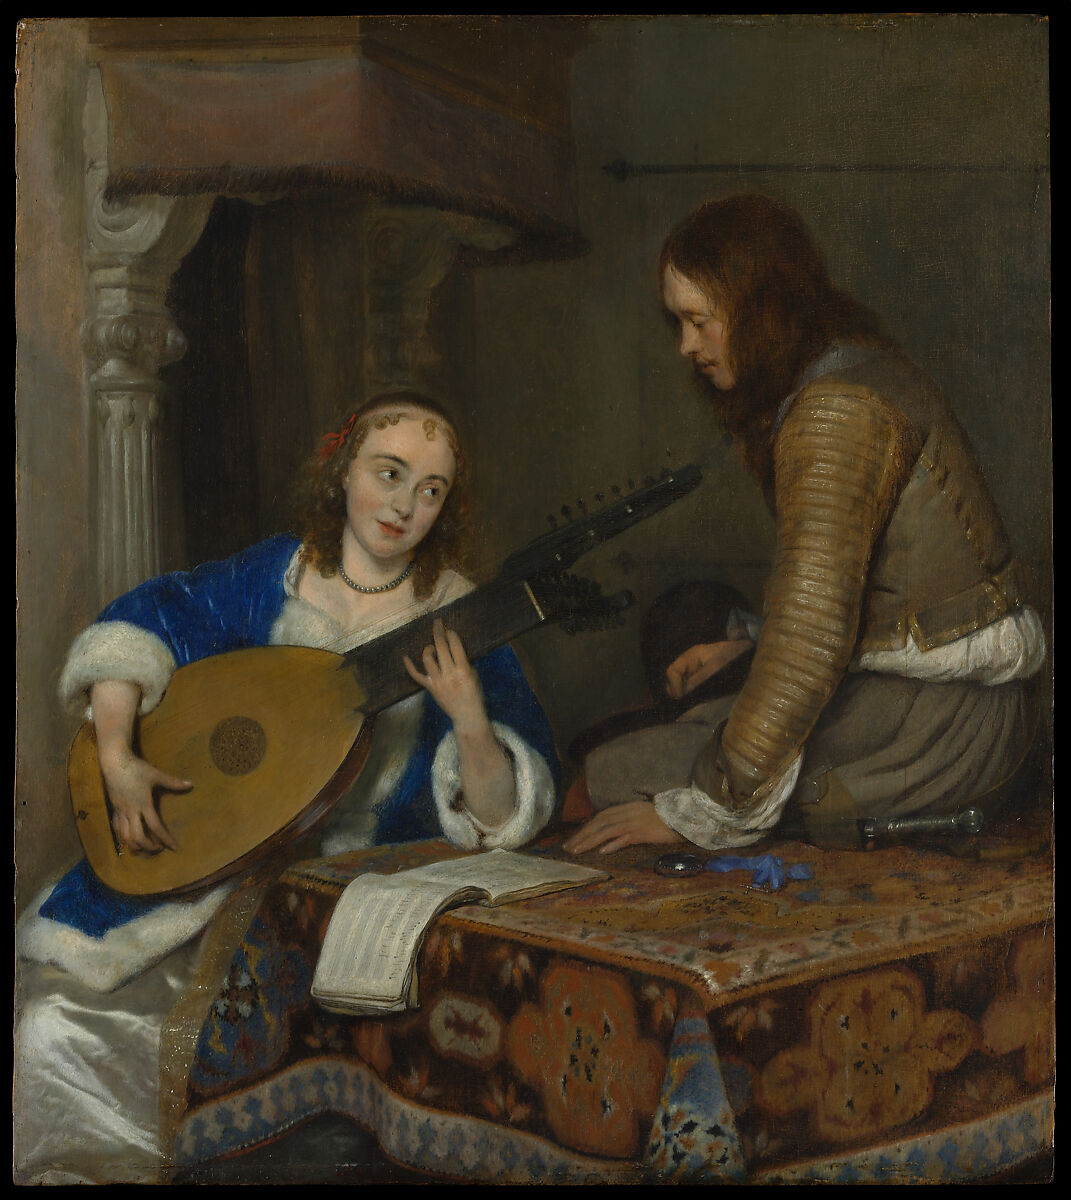 A Woman Playing the Theorbo-Lute and a Cavalier, Gerard ter Borch the Younger (Dutch, Zwolle 1617–1681 Deventer), Oil on wood 